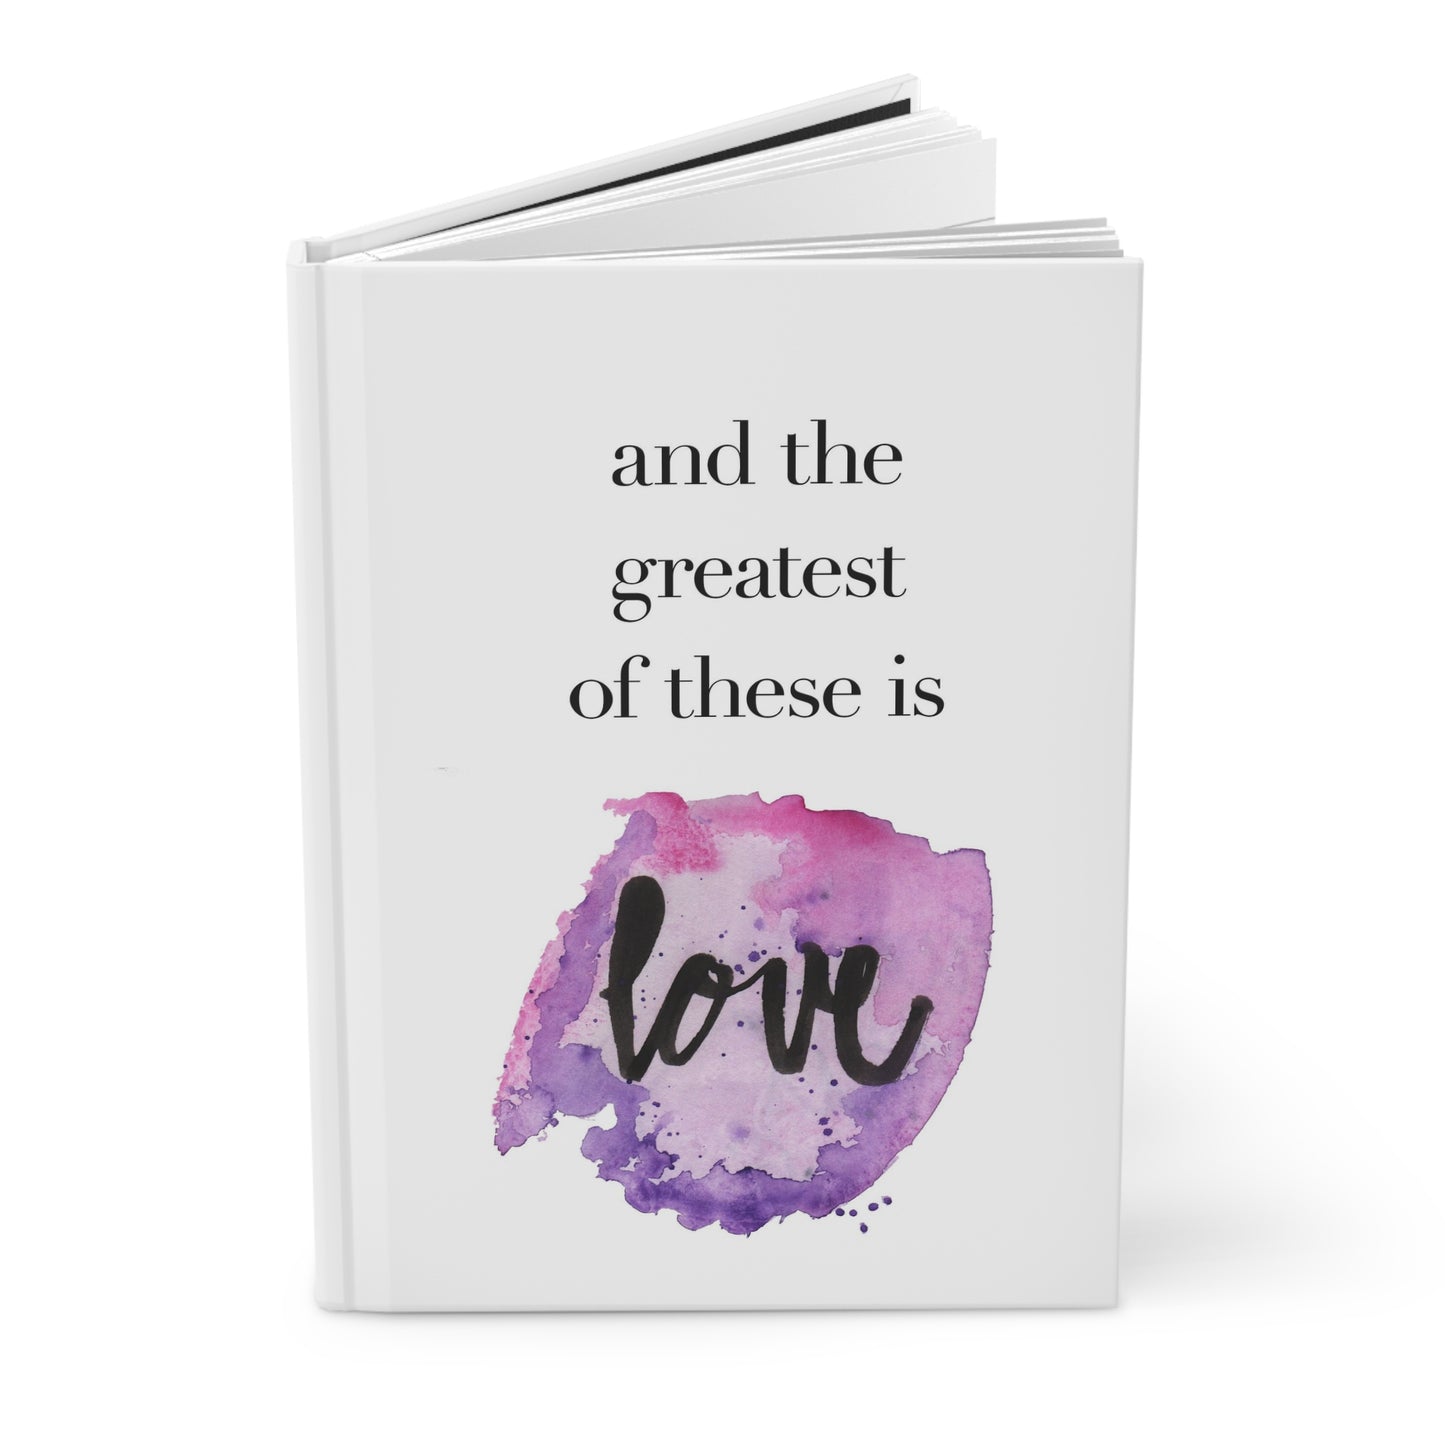 The the Greatest of these is LOVE Journal